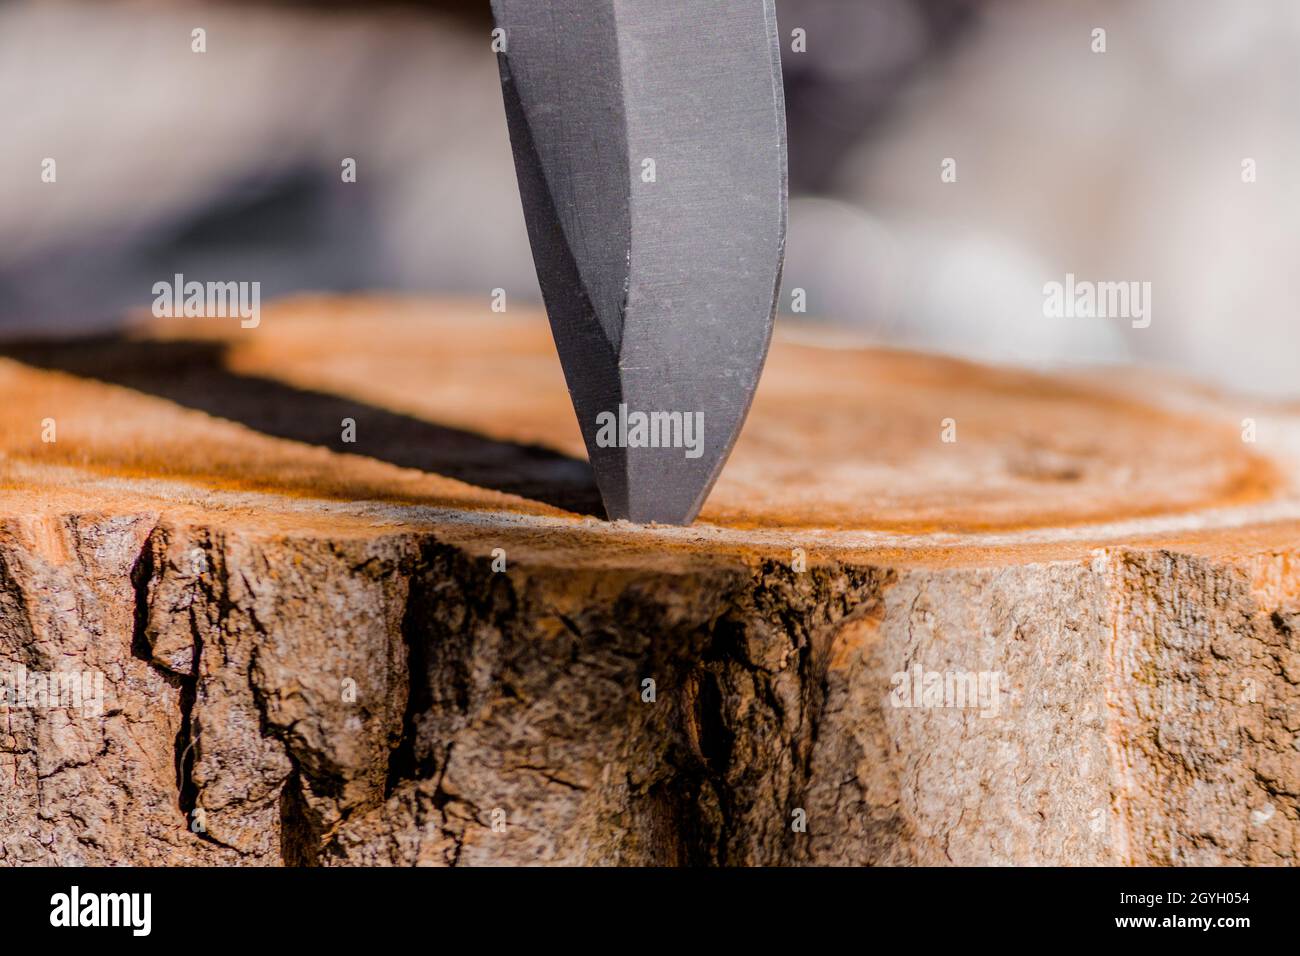 The sharp blade of a knife is stuck in a wooden stump and creates a shadow. Stock Photo